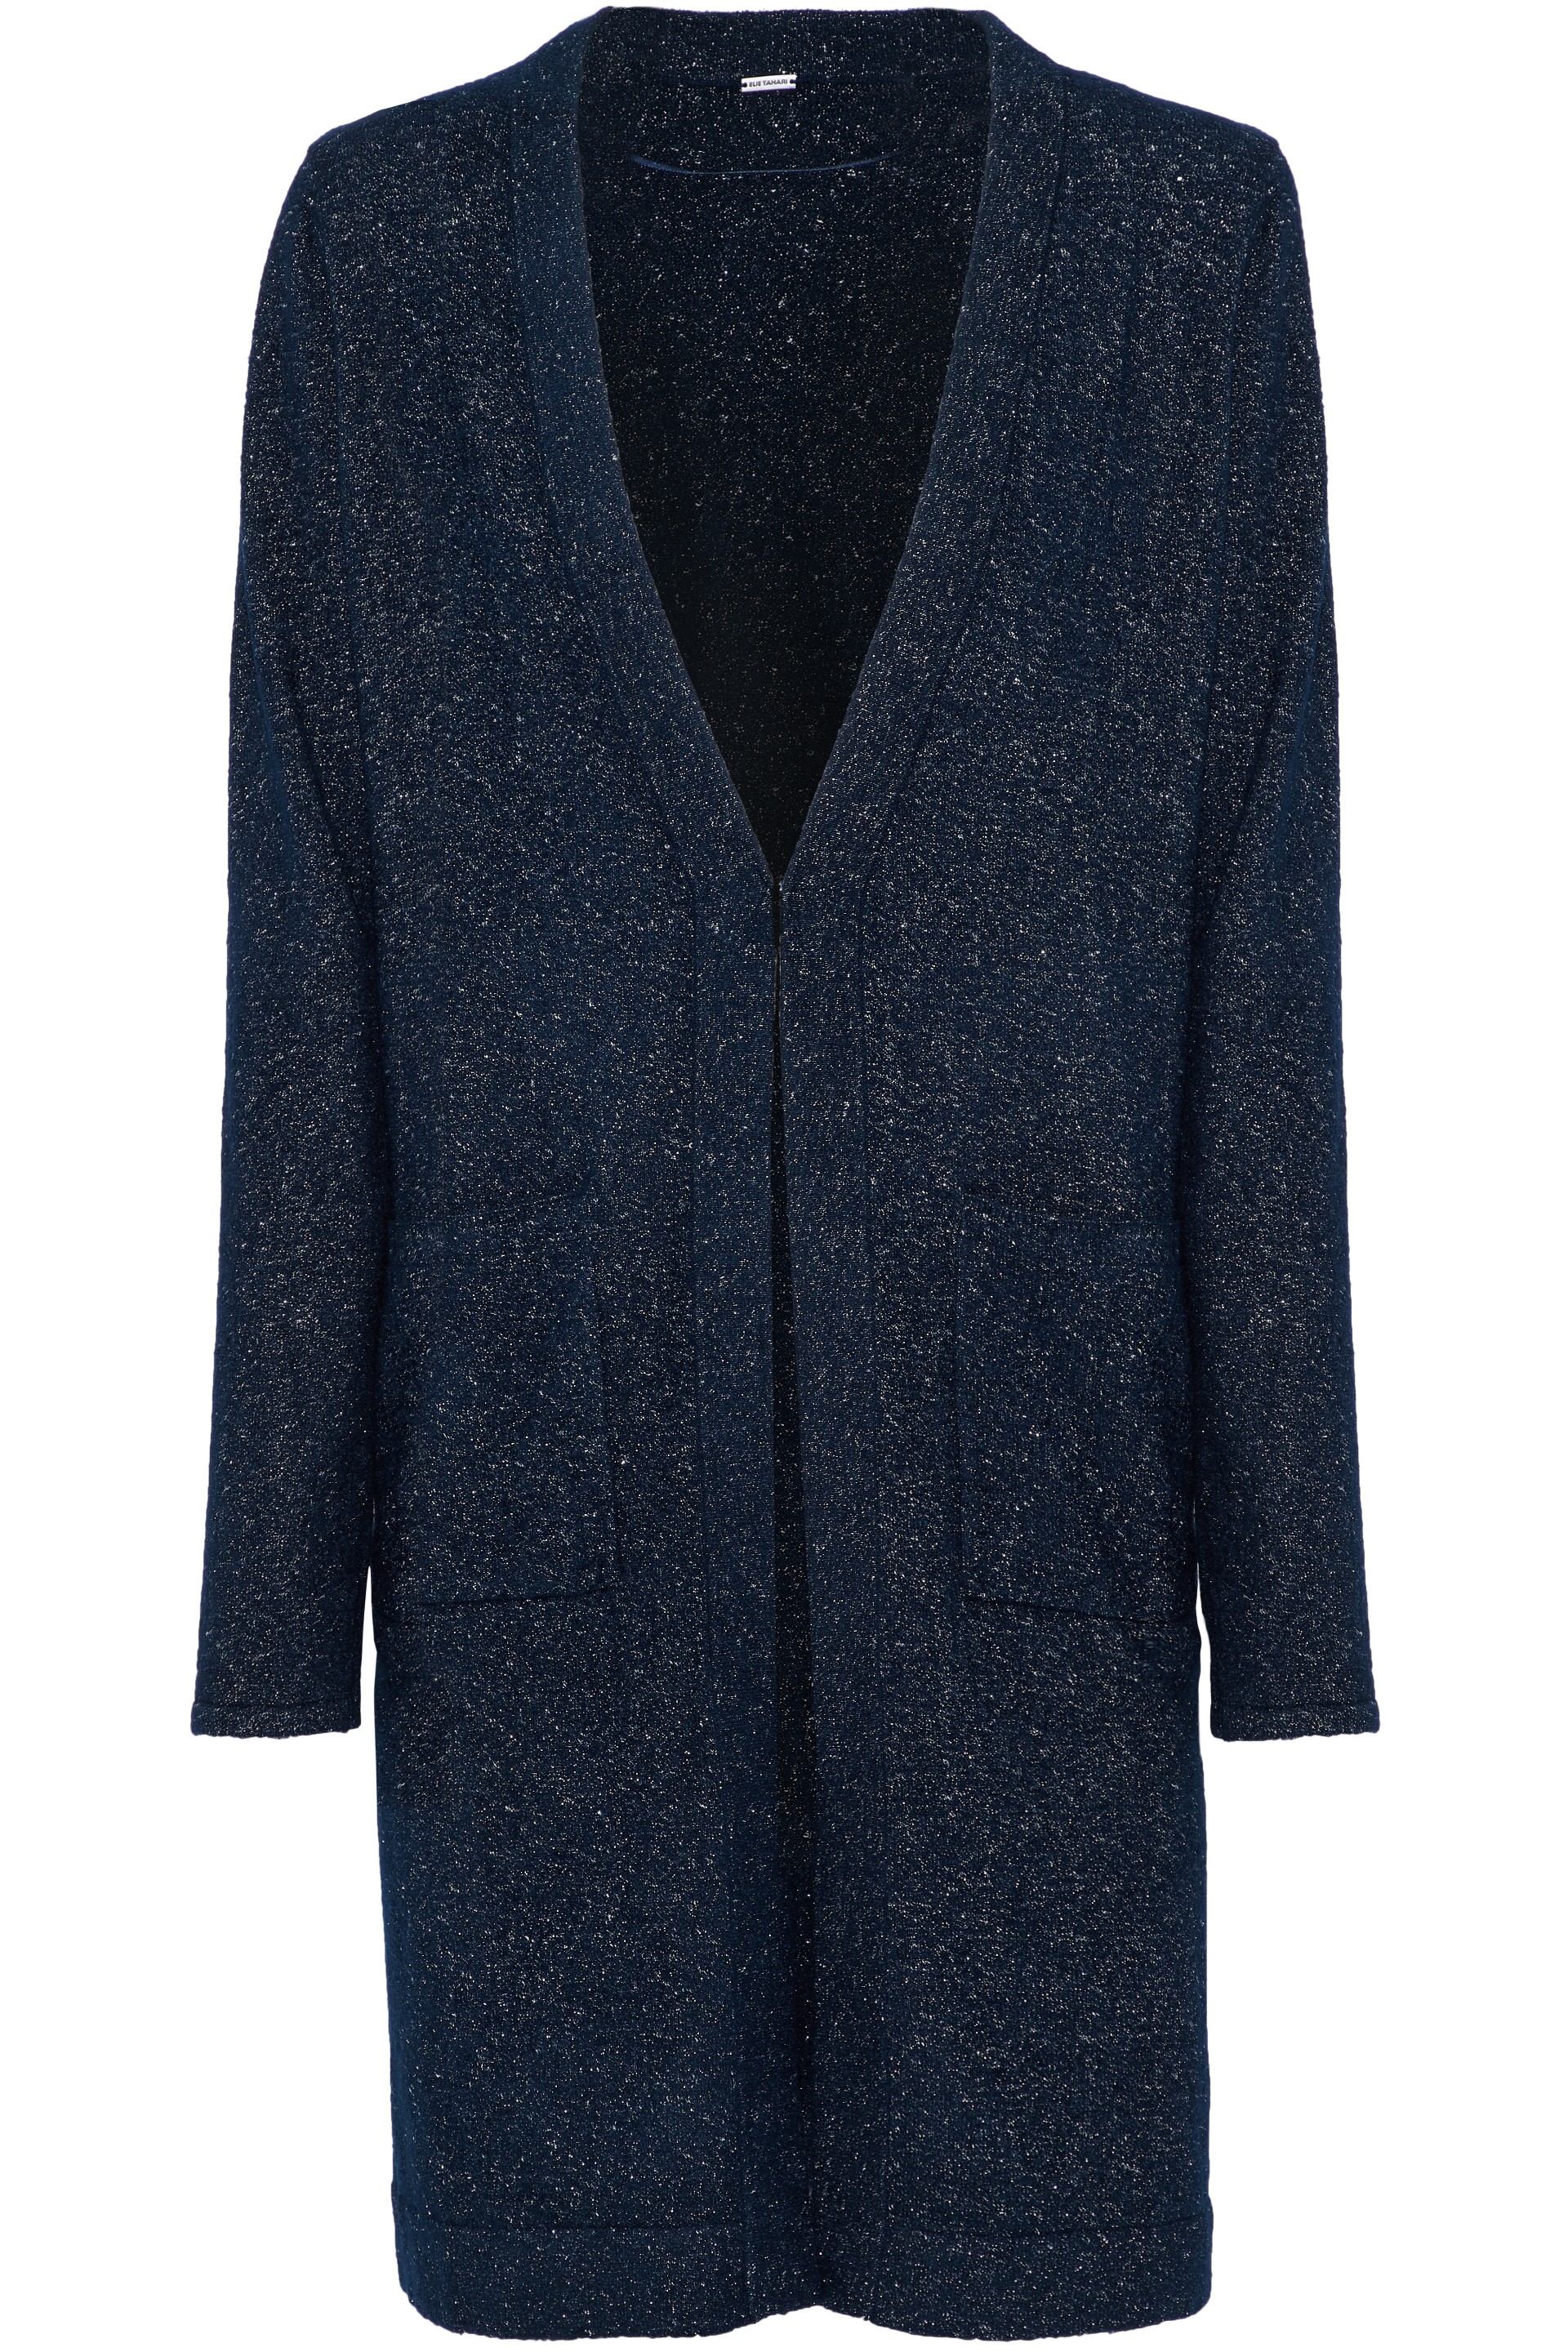 Designer Cardigans For Women | Sale Up To 70% Off At THE OUTNET